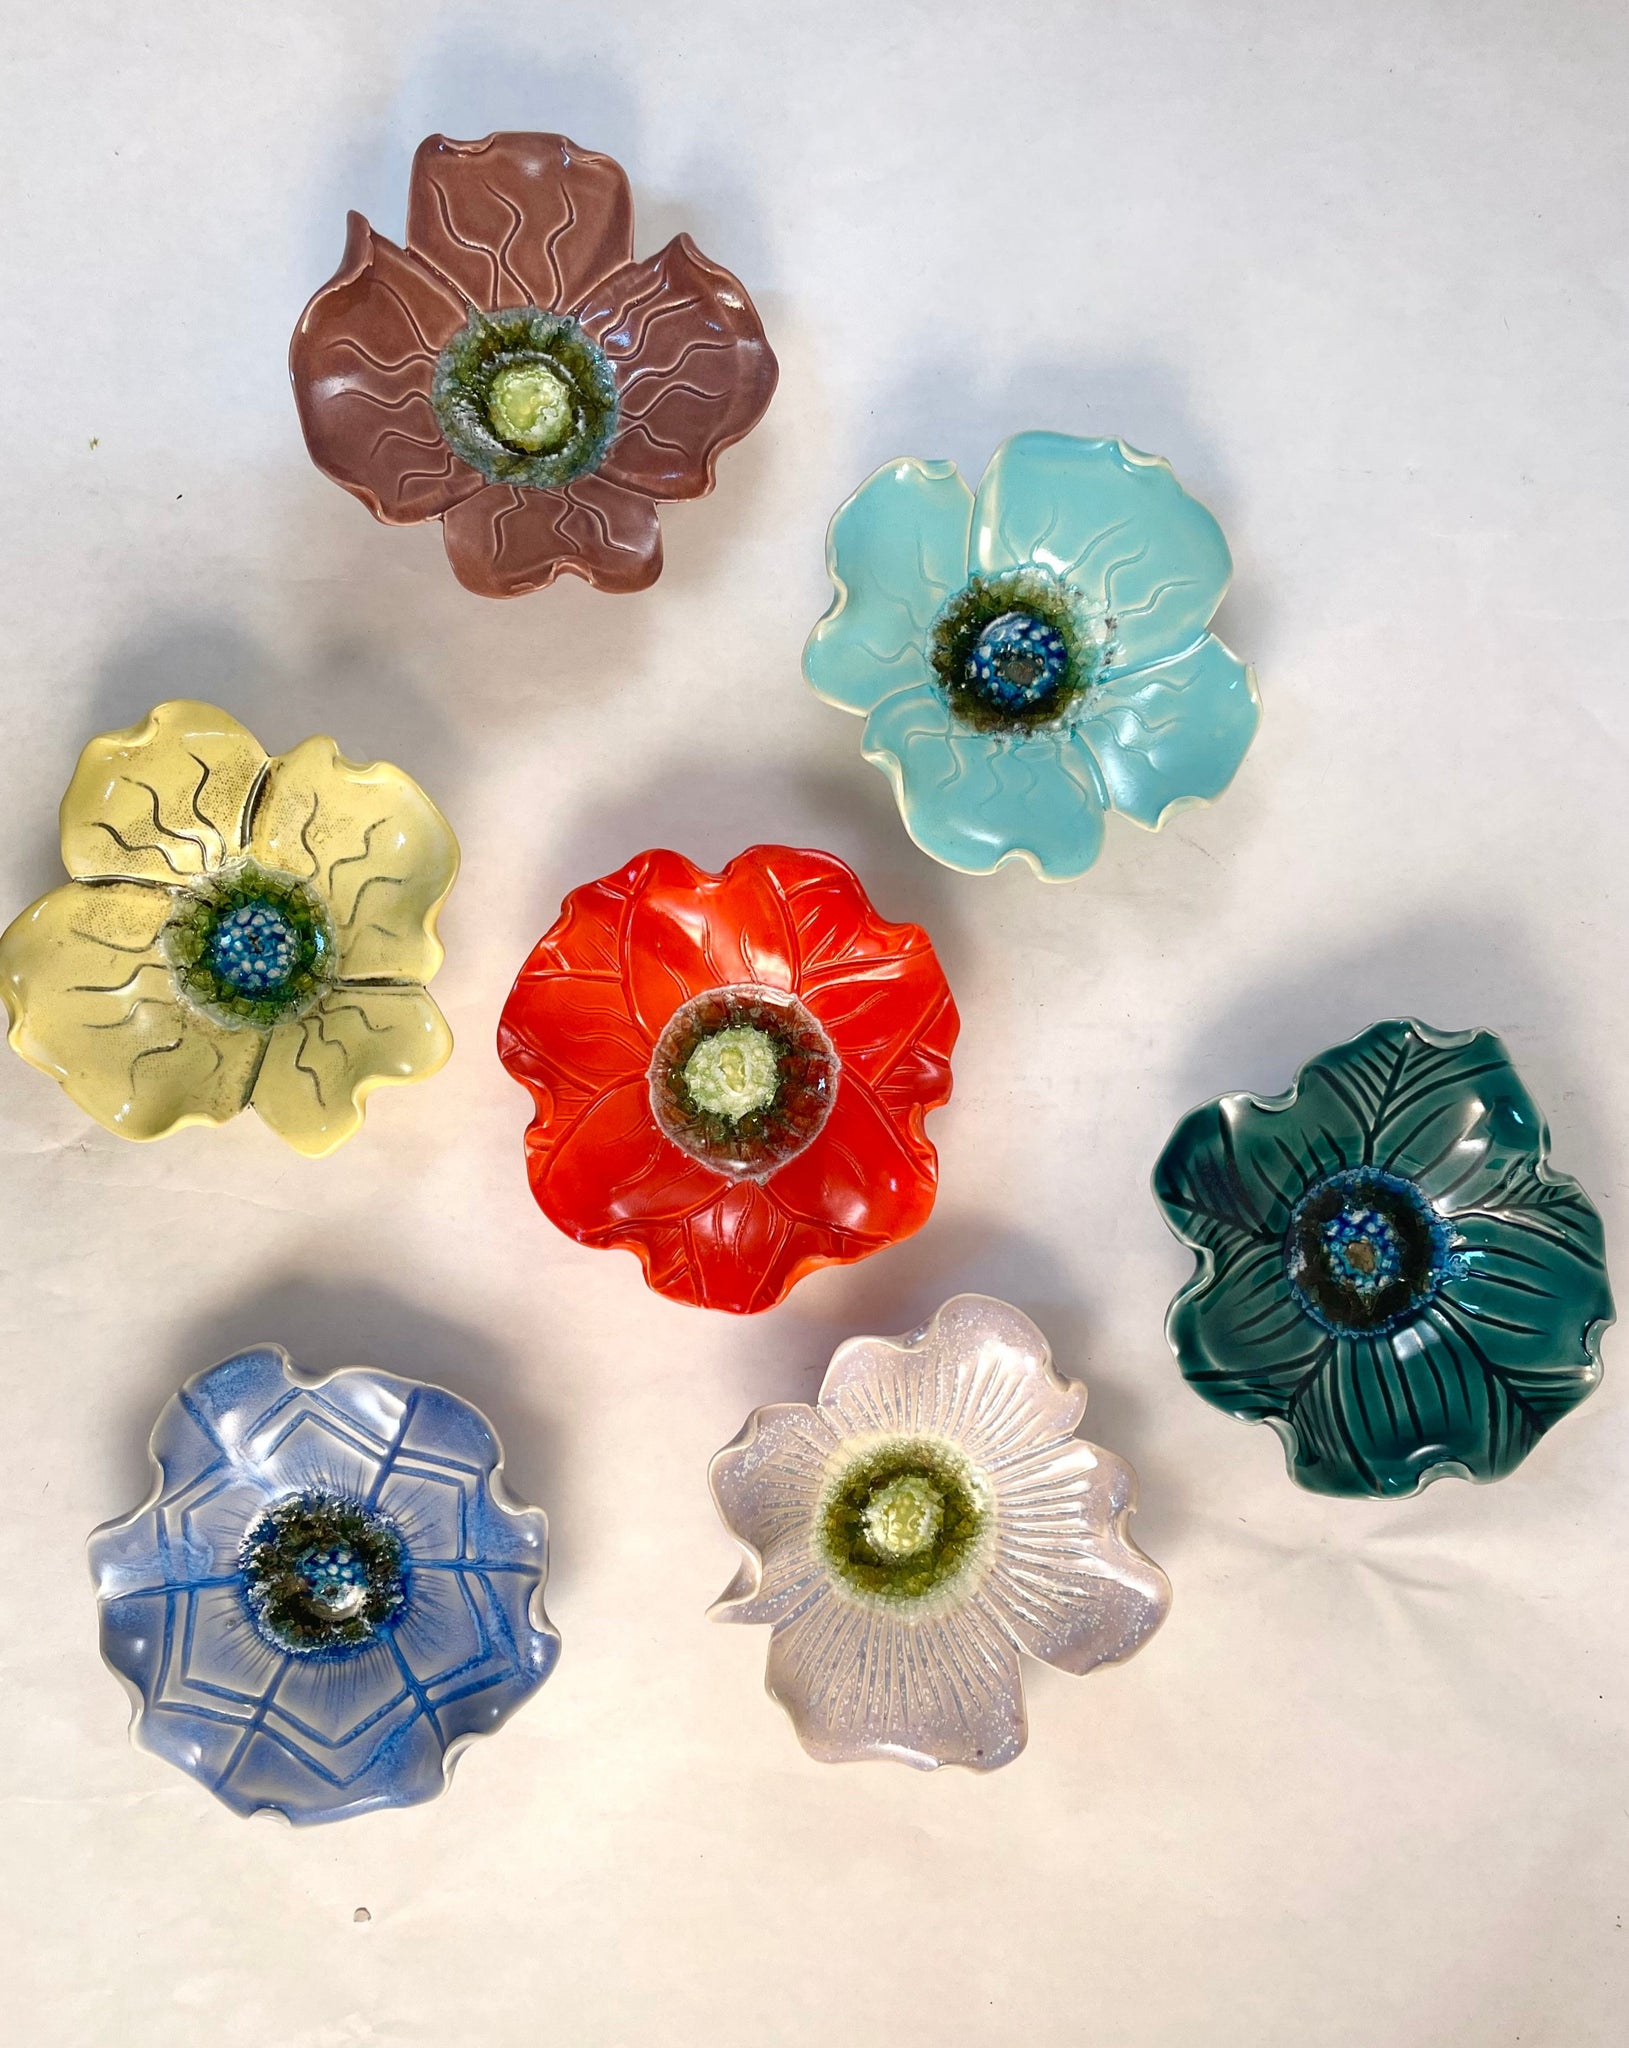 Meya - Wall Flowers - Baby 4-5" (Assorted Colors/Designs)